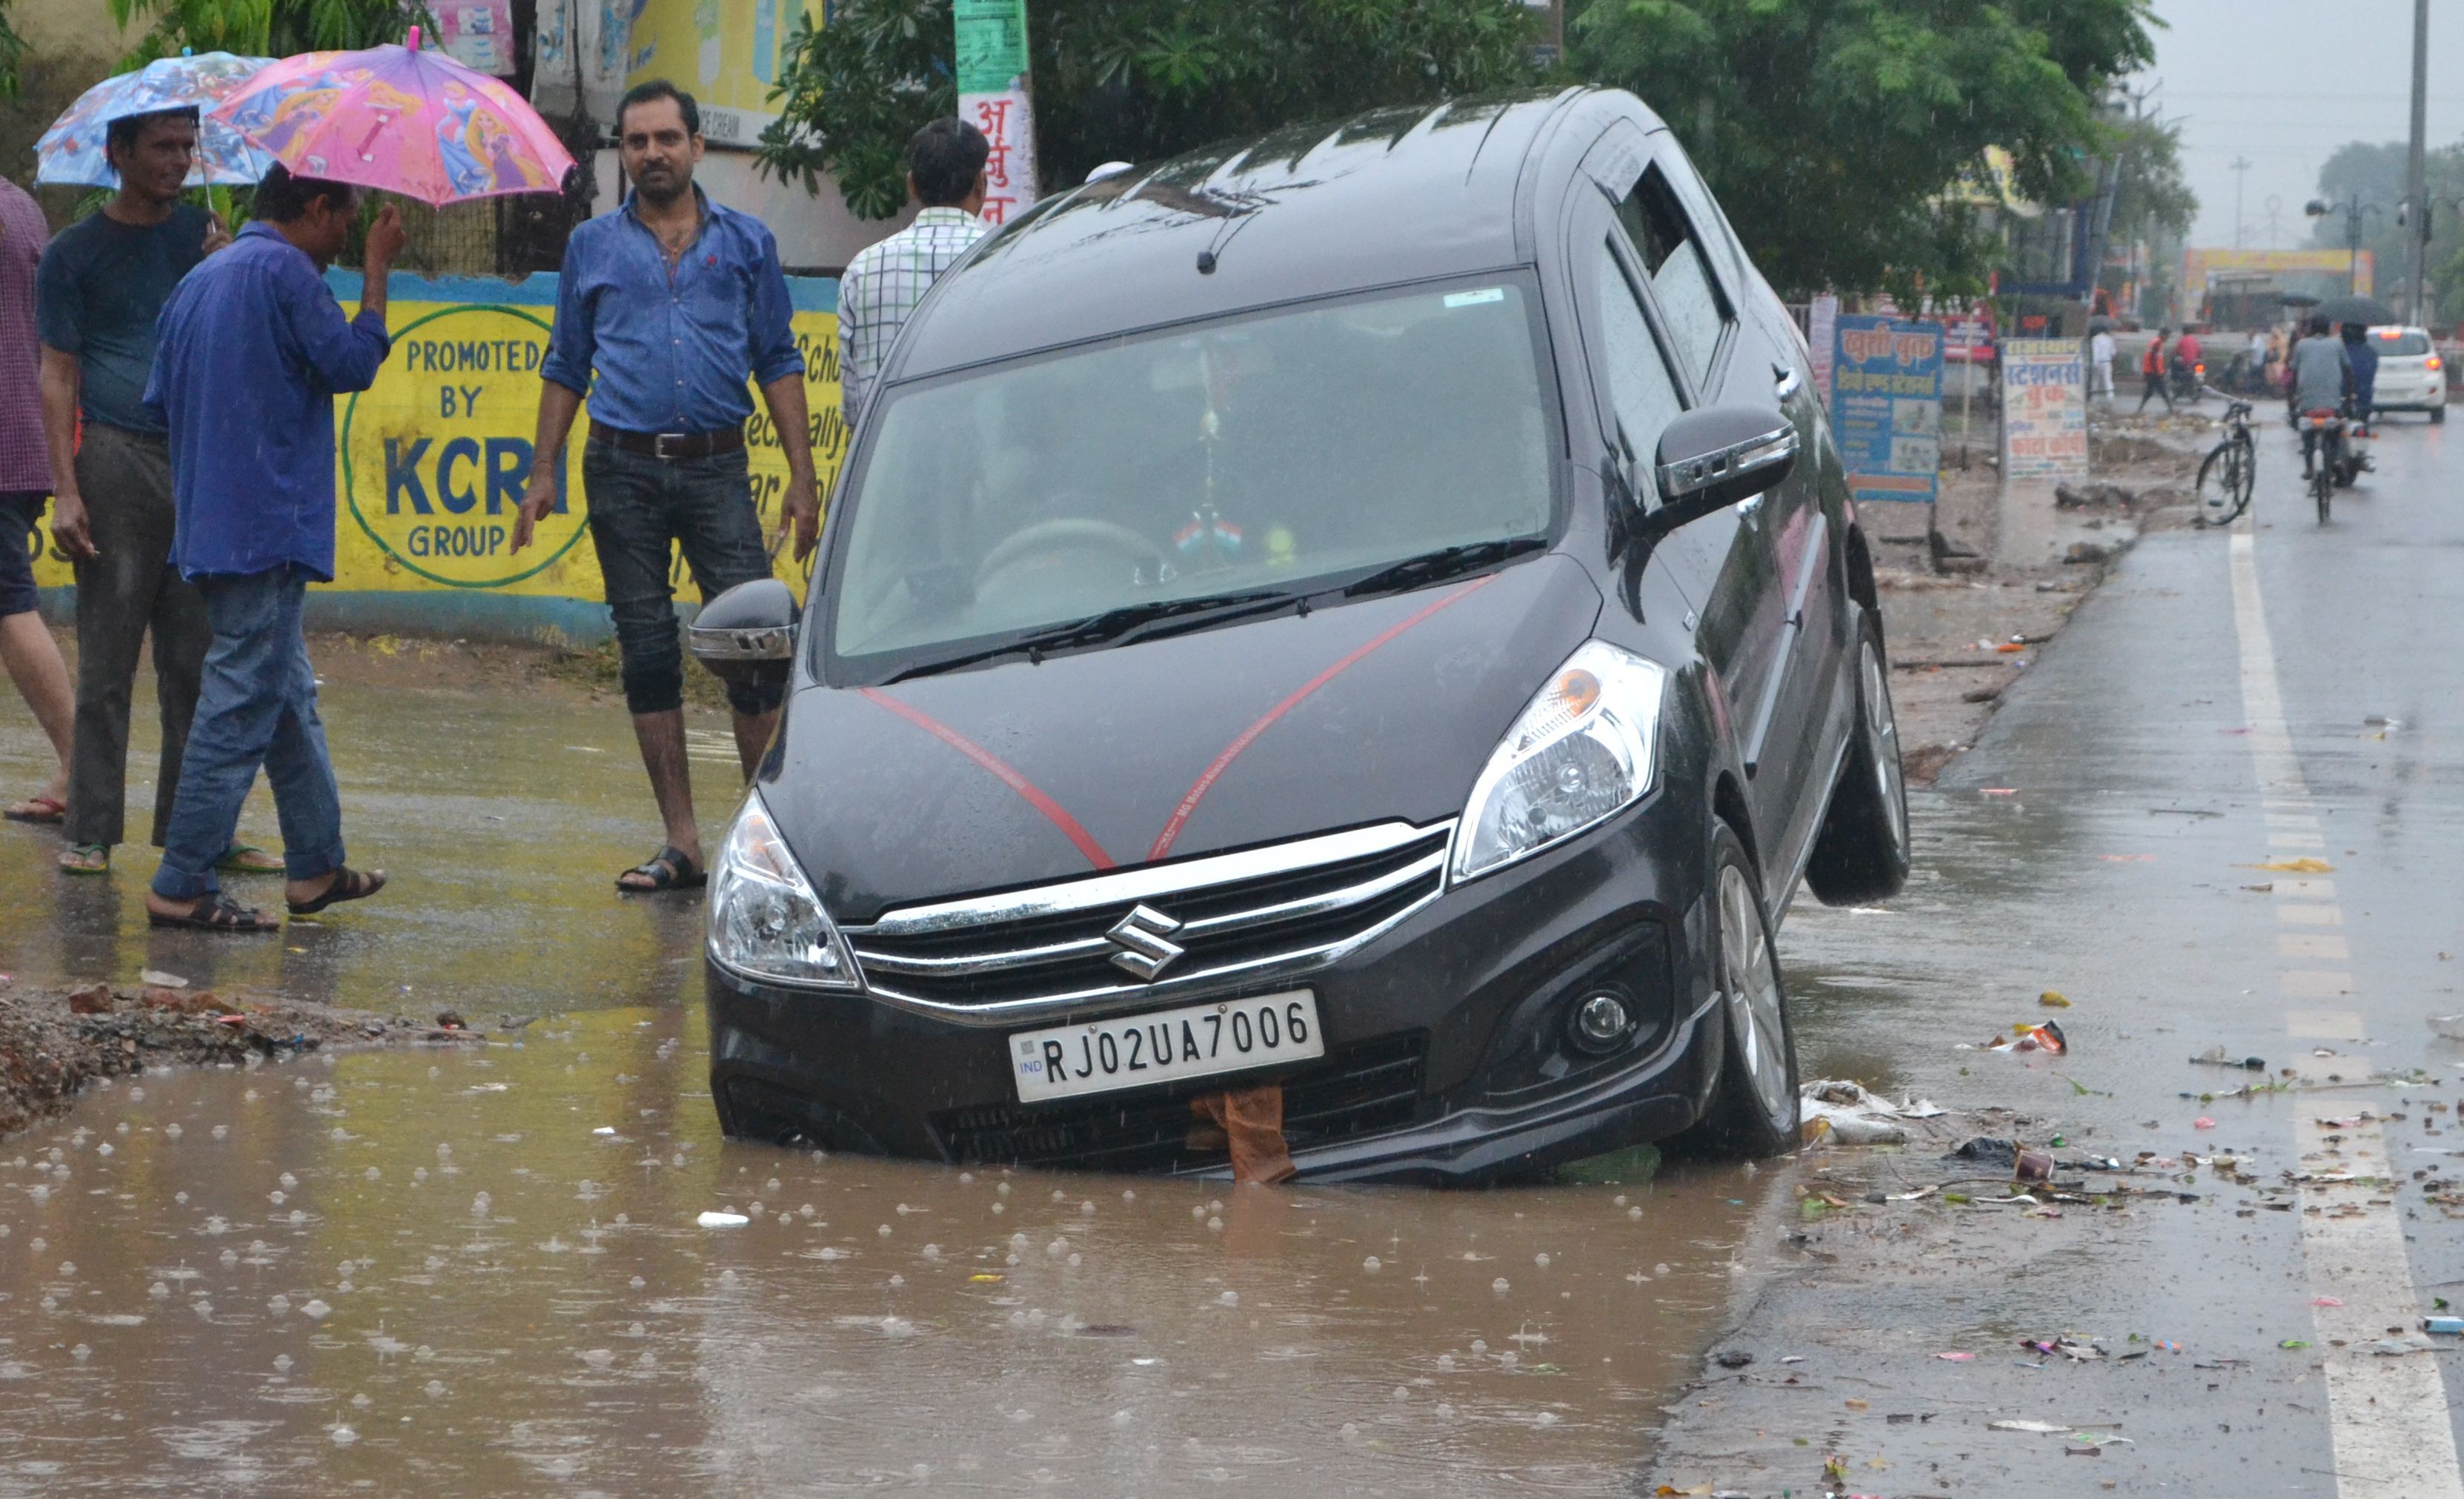 Vehicles Drown Into road after Heavy Rain in Alwar